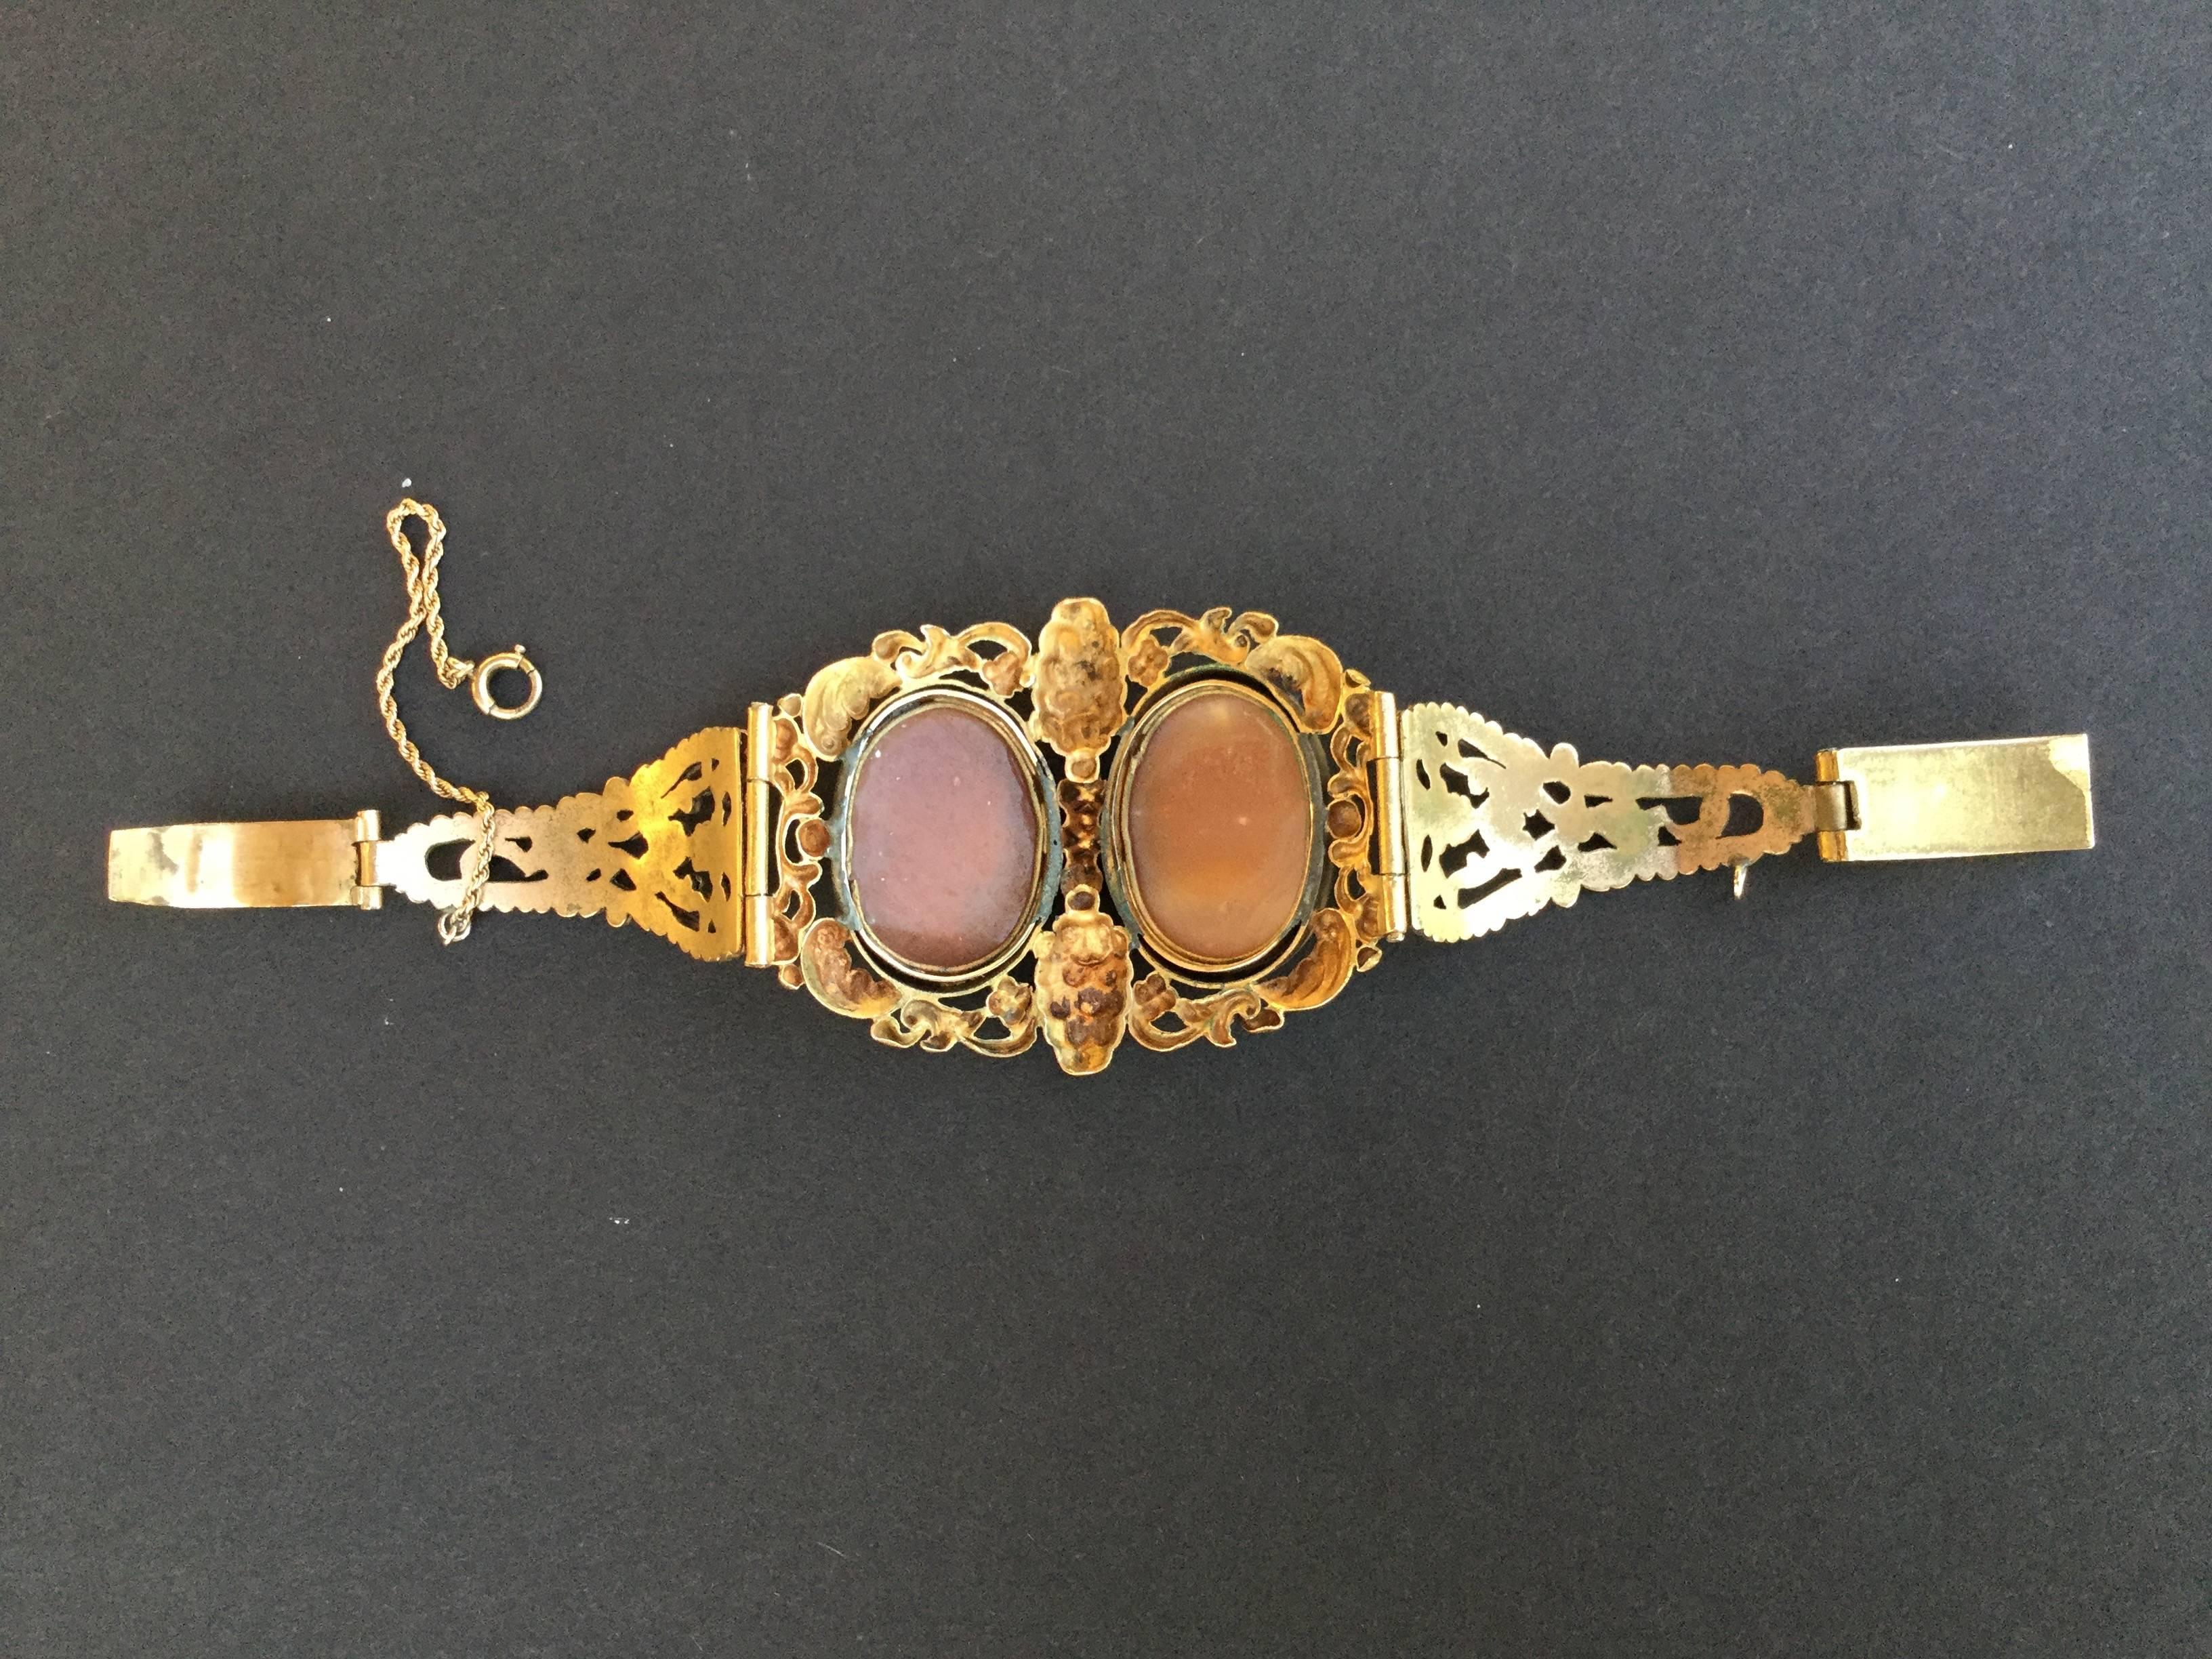 Women's Amazing Double Cameo Style Victorian Pinchbeck Bracelet. English C.1880's.